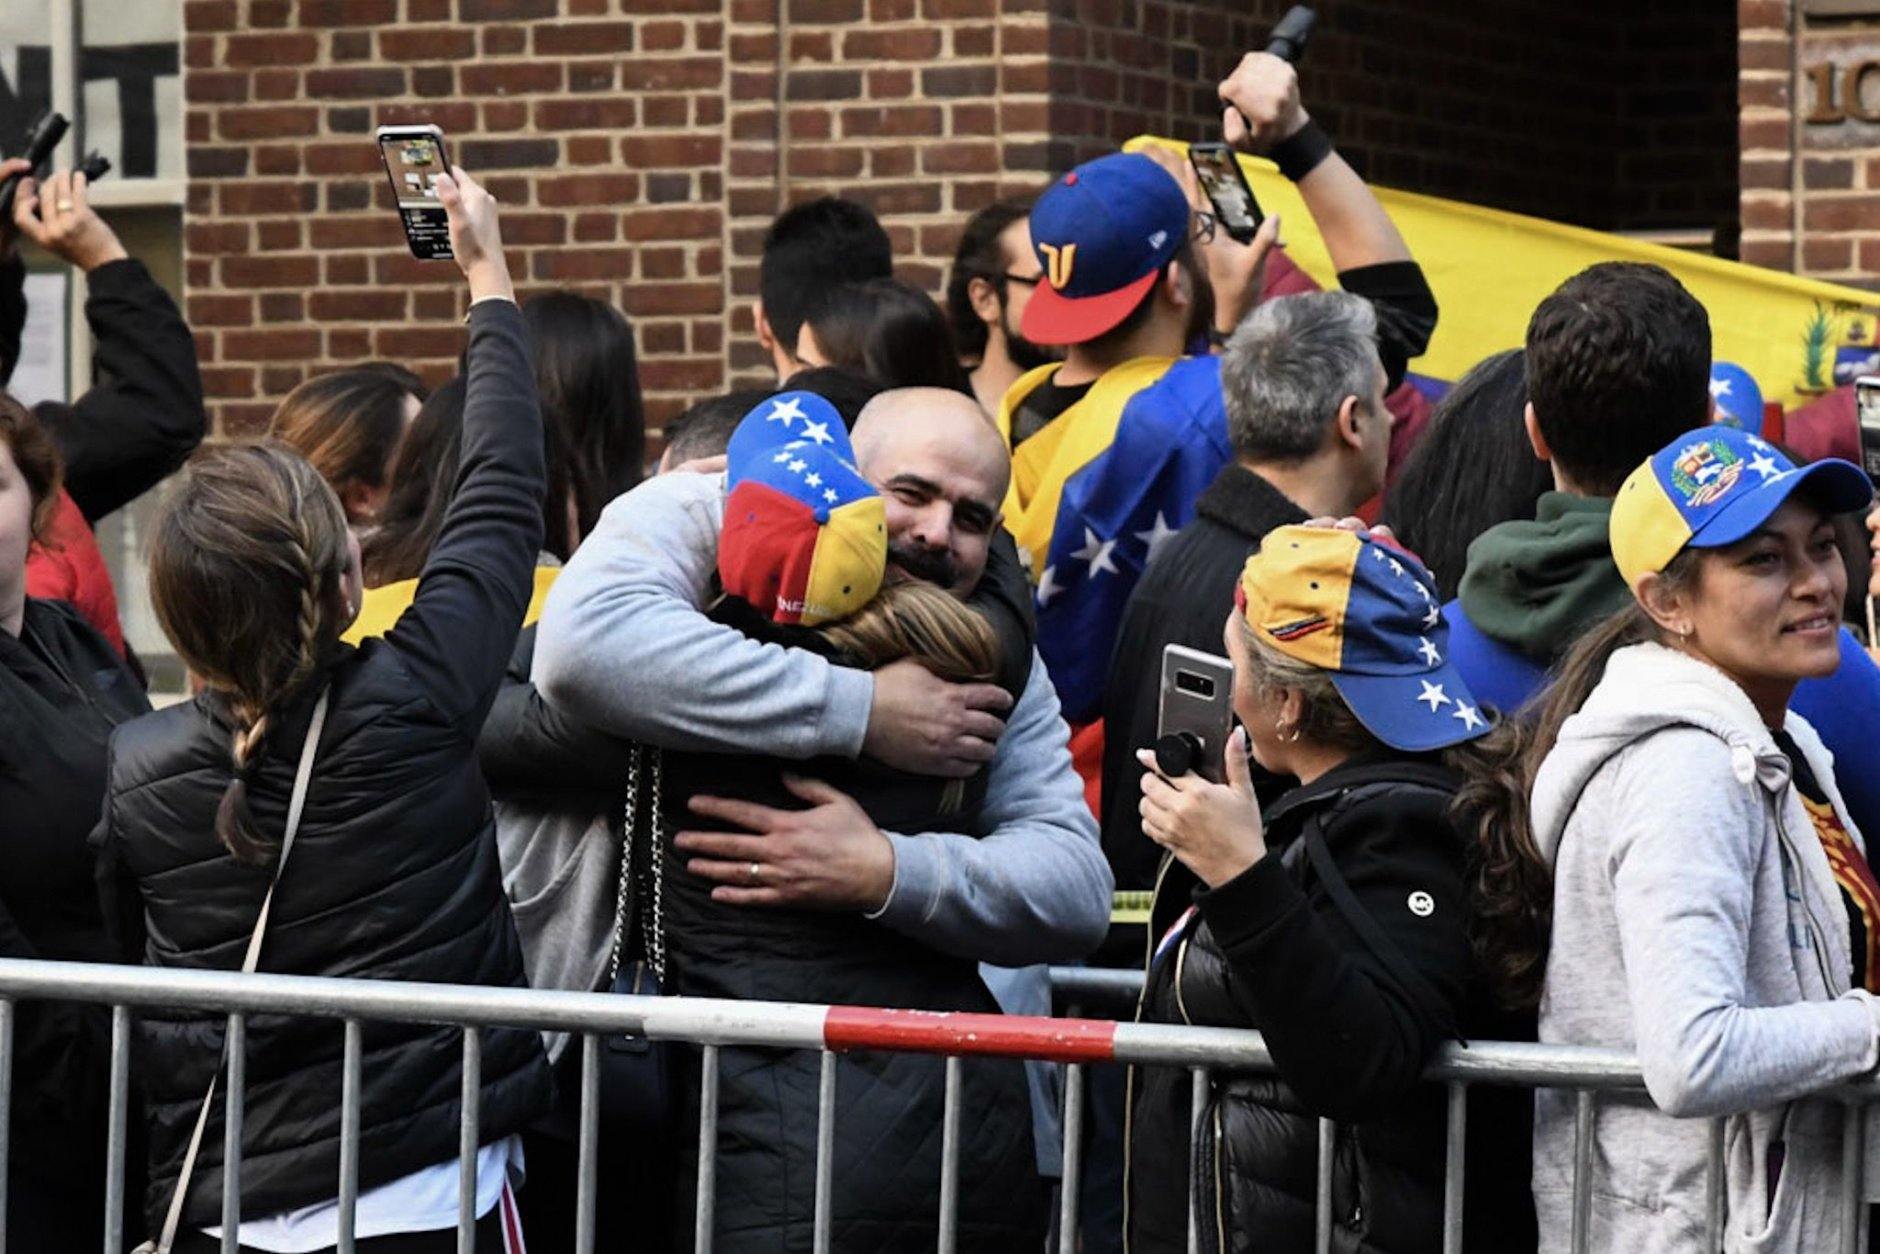 Two Venezuelans embrace in celebration as a months-long occupation of the embassy by pro-Maduro activists seemed to be coming to an end. Arrests had not occurred as of Wednesday morning, though notice had been served that the four activists who remained within were in violation of D.C. and federal law. (WTOP/Alejandro Alvarez)